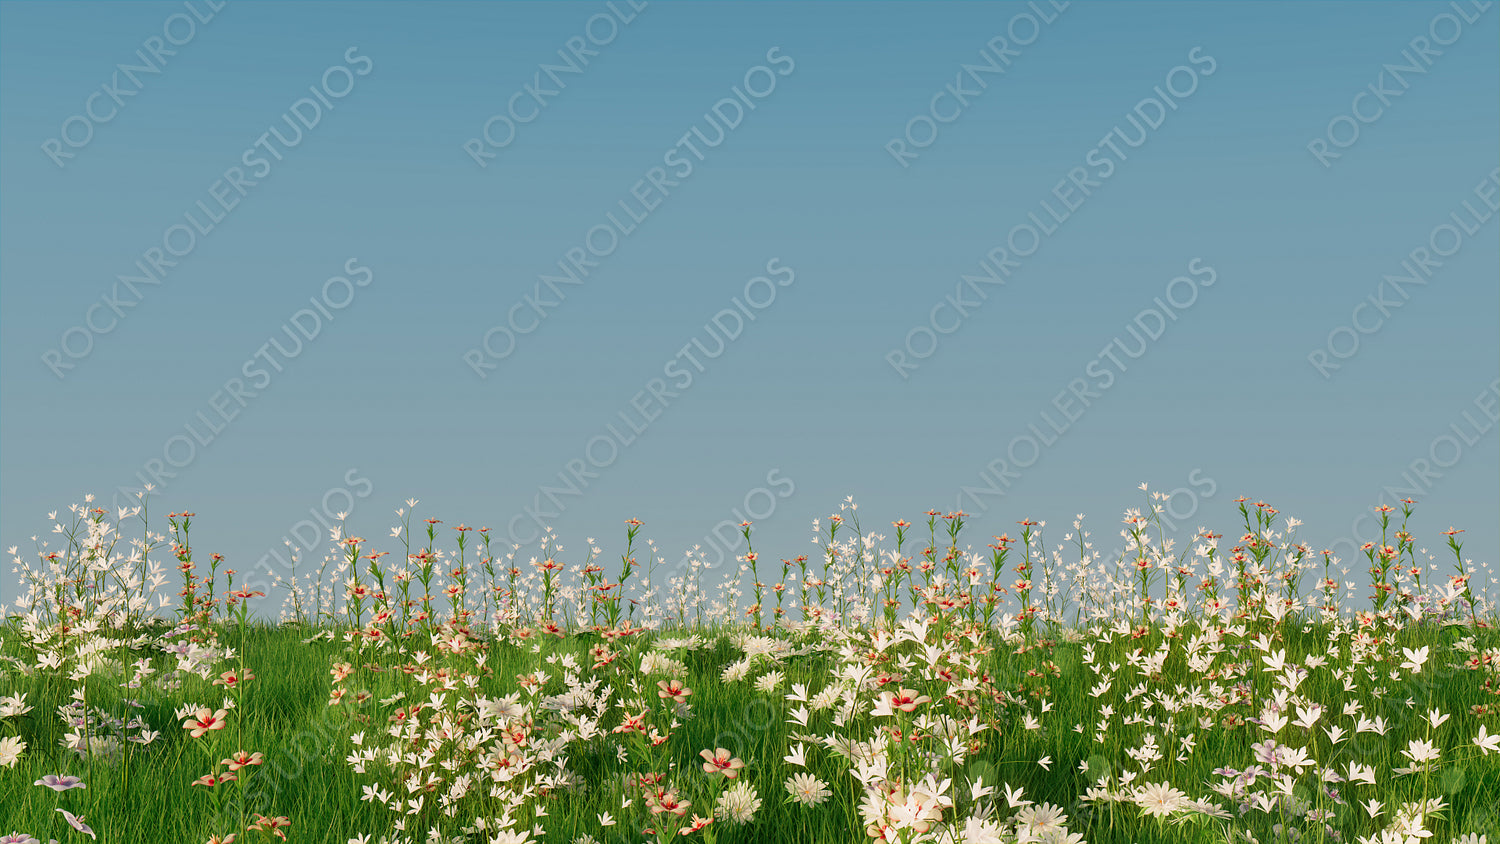 Spring Field with Long Grass, Wild Flowers and clear blue sky. Nature Background with space for copy.